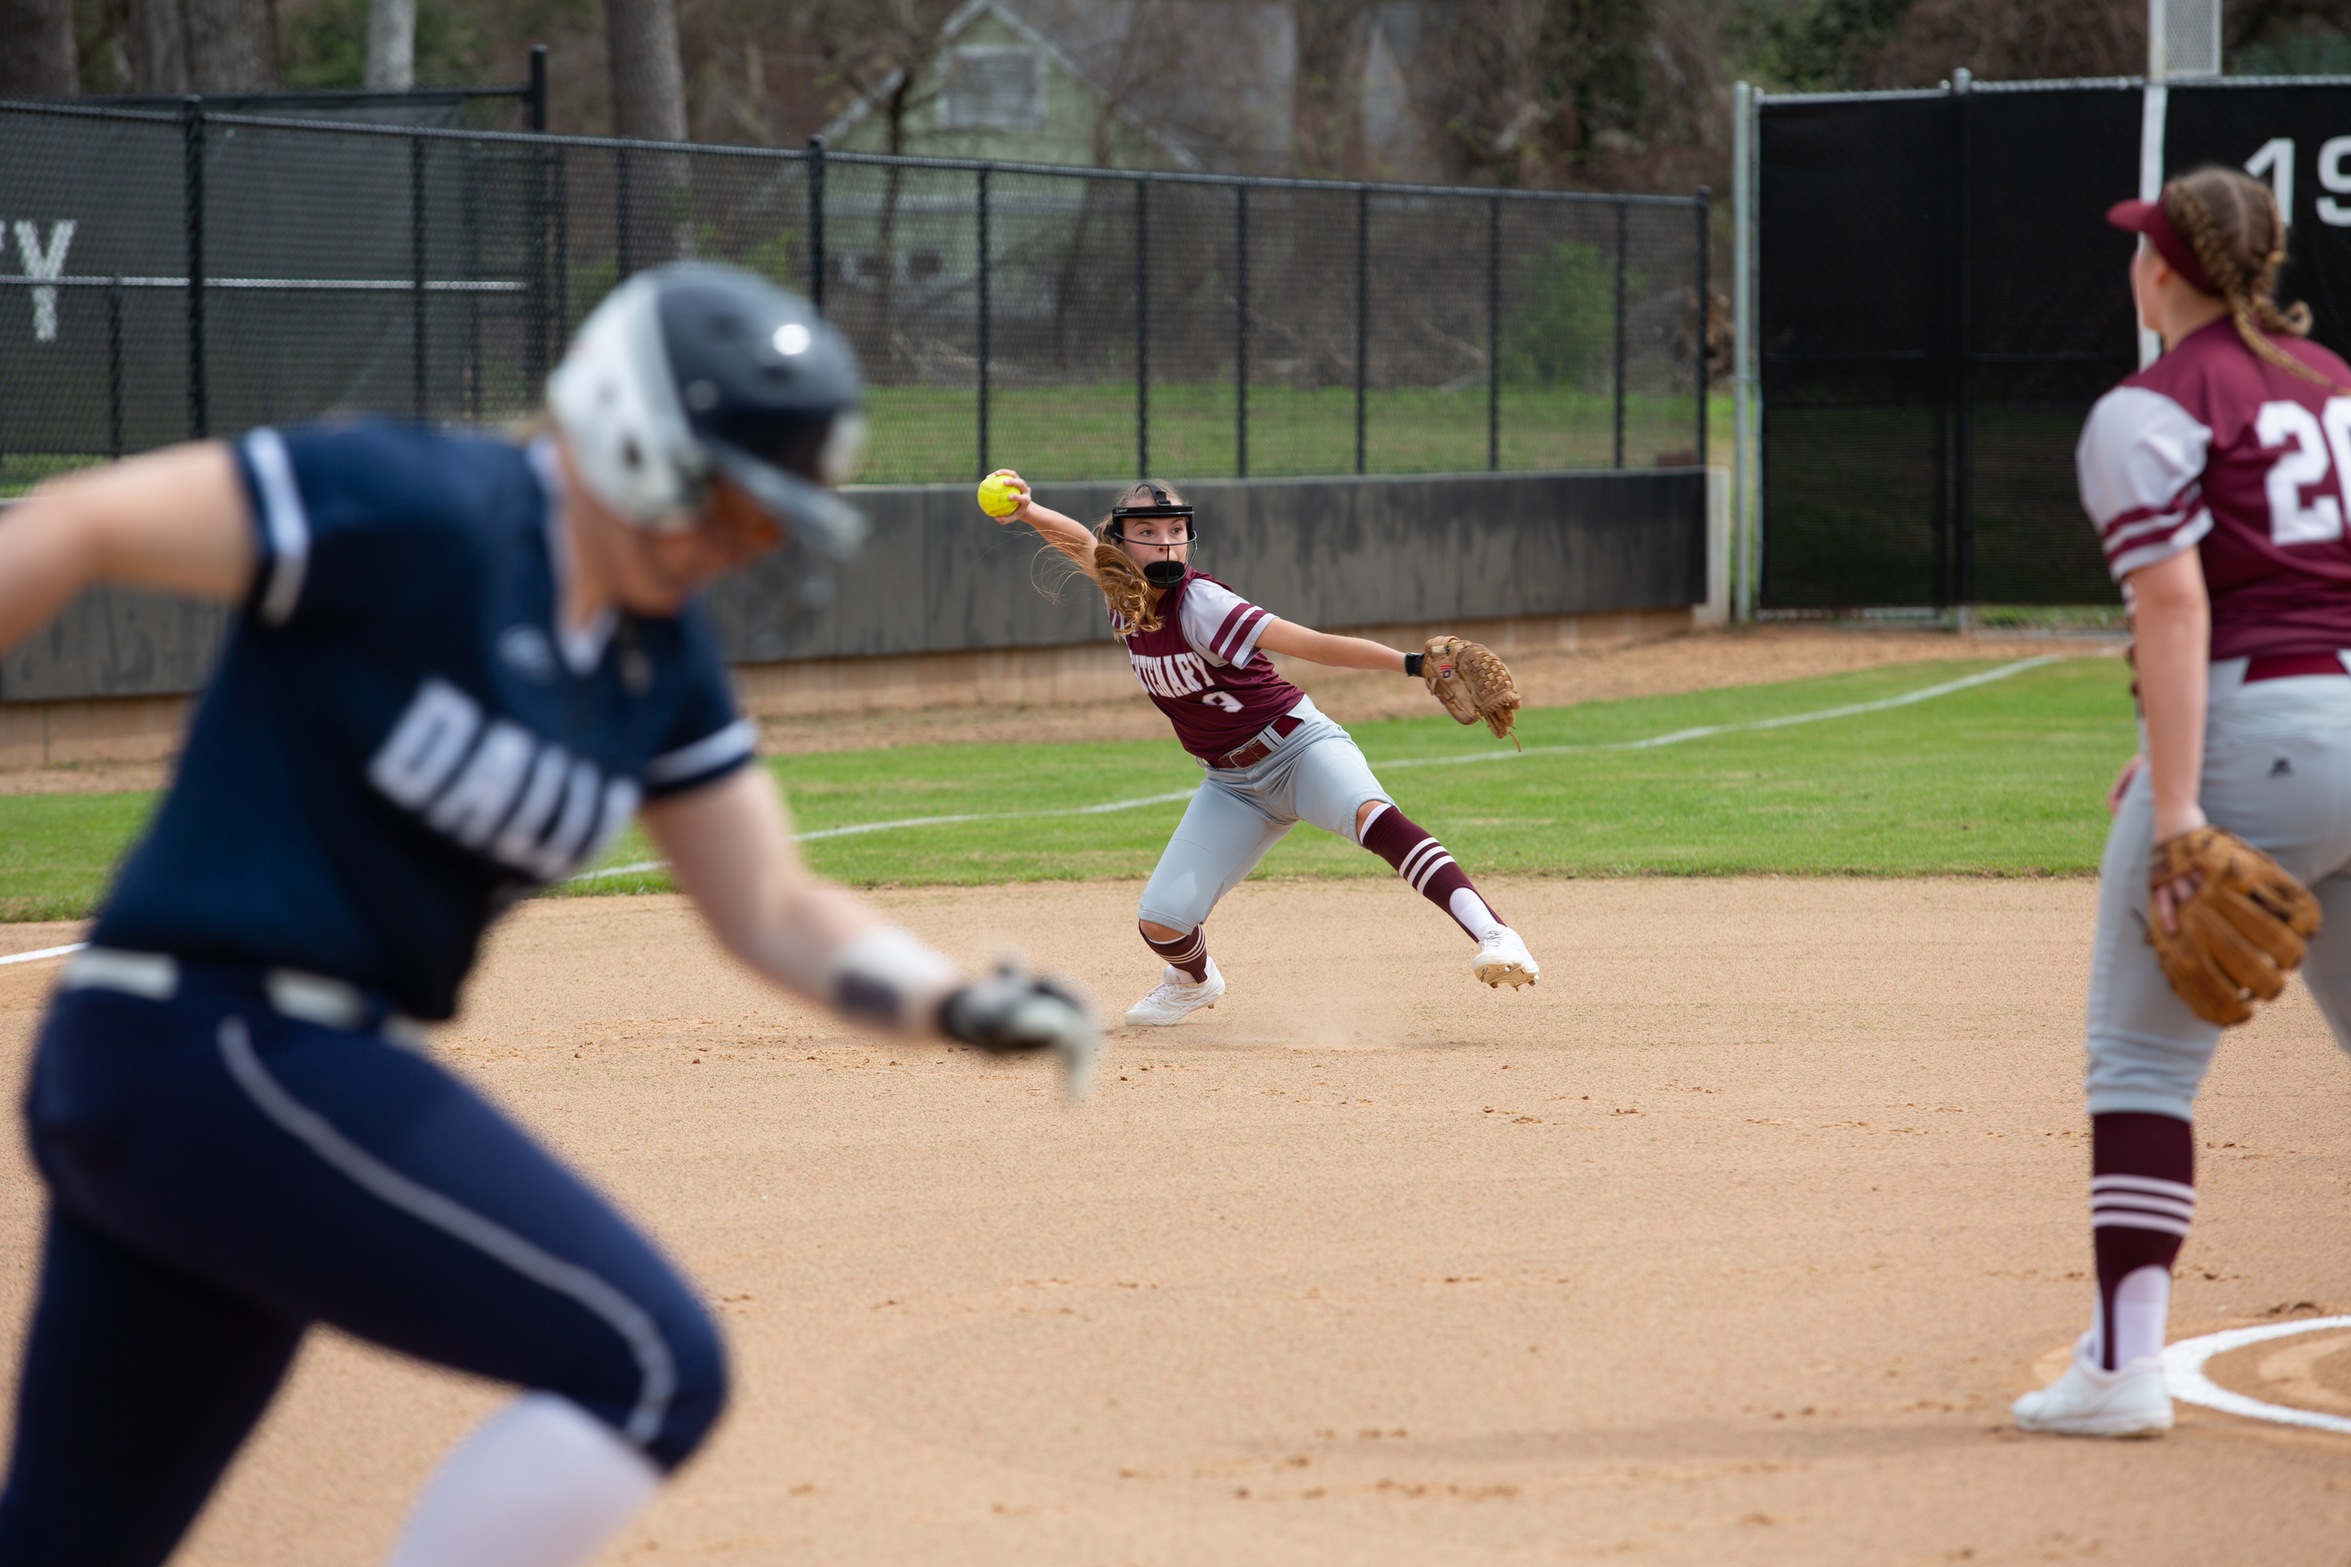 Softball Finishes off Weekend Sweep of Dallas with 4-1 Win on Sunday